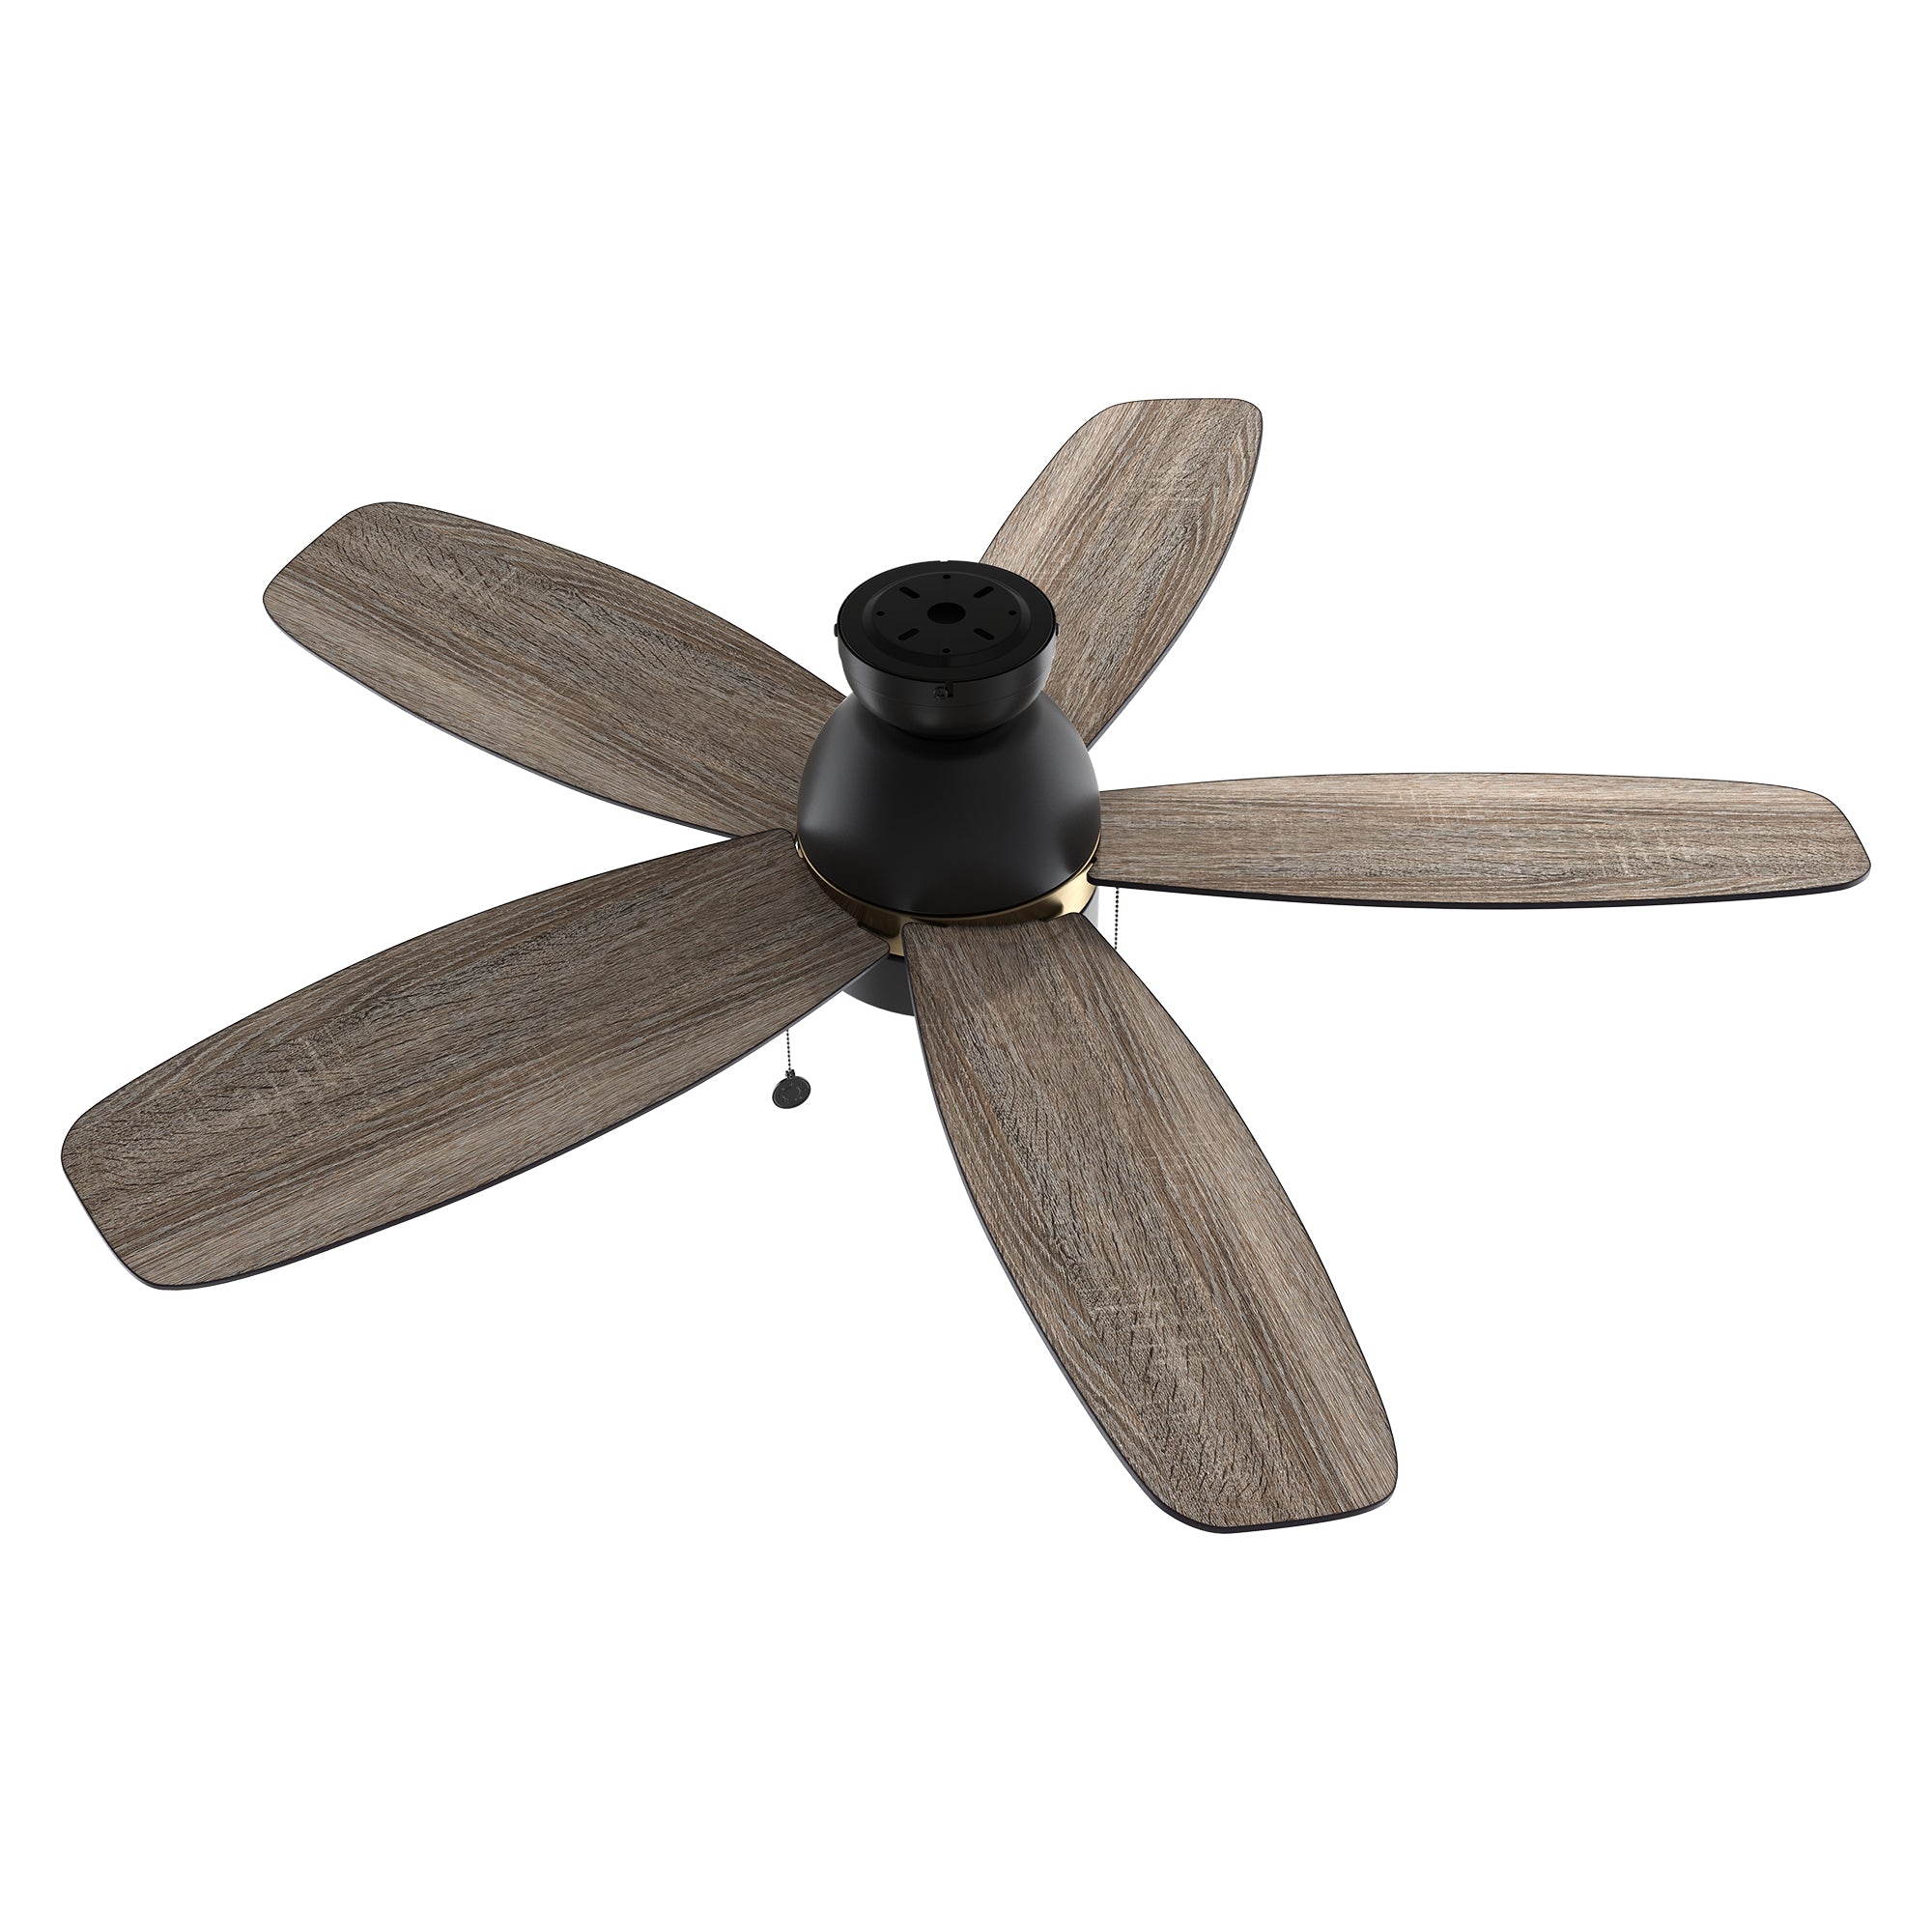 Carro flush mount Treyton 52 inch pull chain ceiling fan with 5 blades, light wood design. 